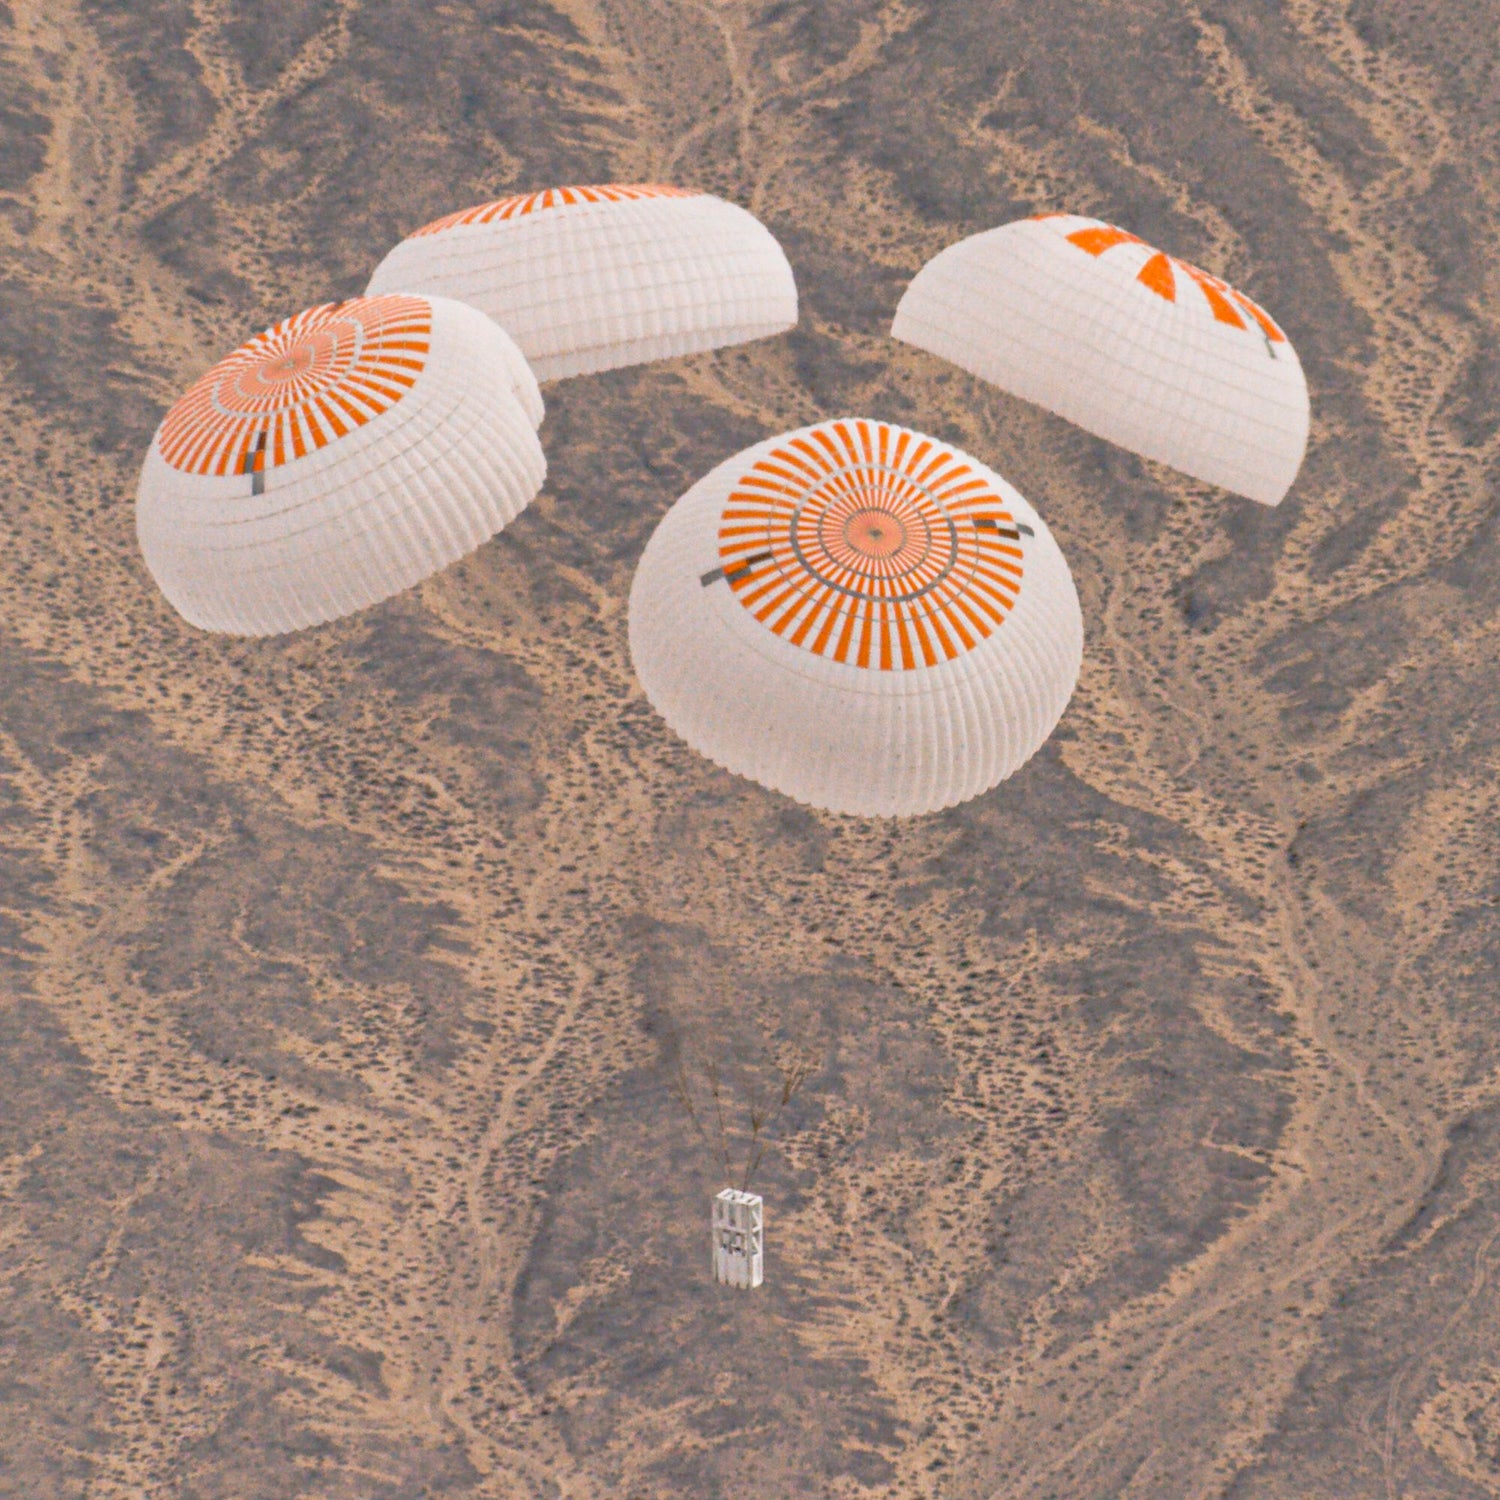 SpaceX completed the 7th successful test of Crew Dragon’s upgraded parachutes